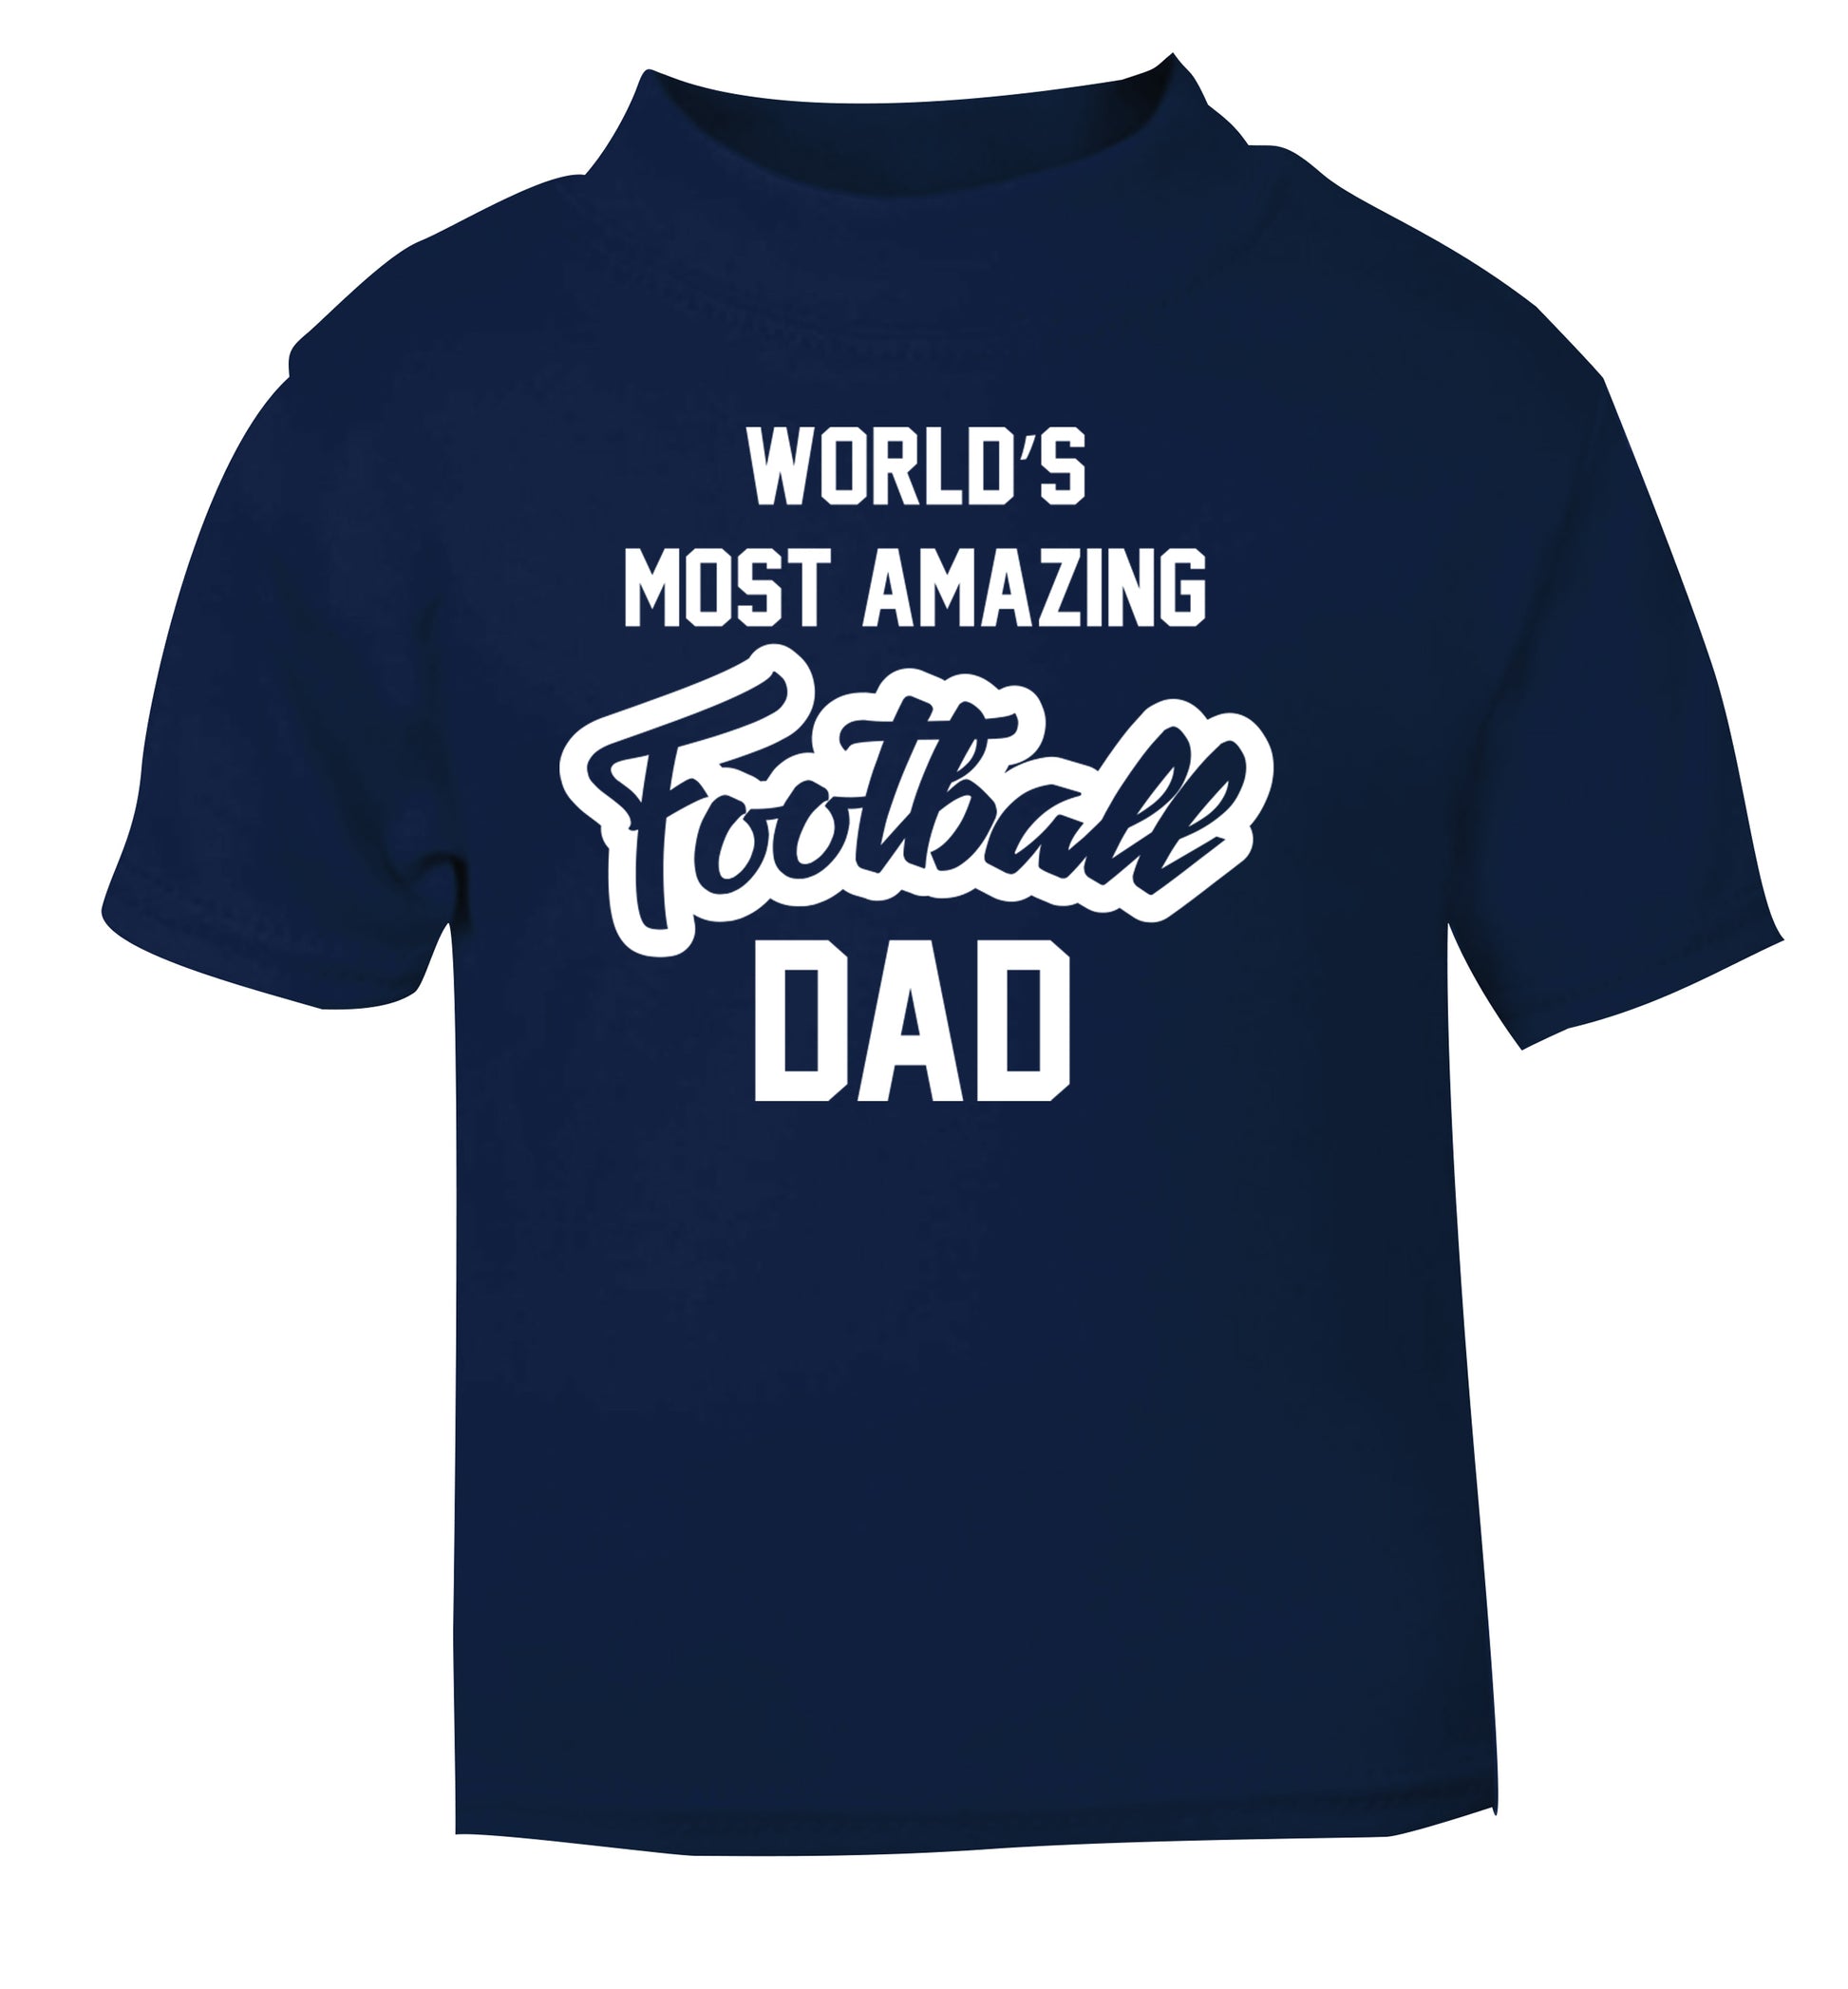 Worlds most amazing football dad navy Baby Toddler Tshirt 2 Years